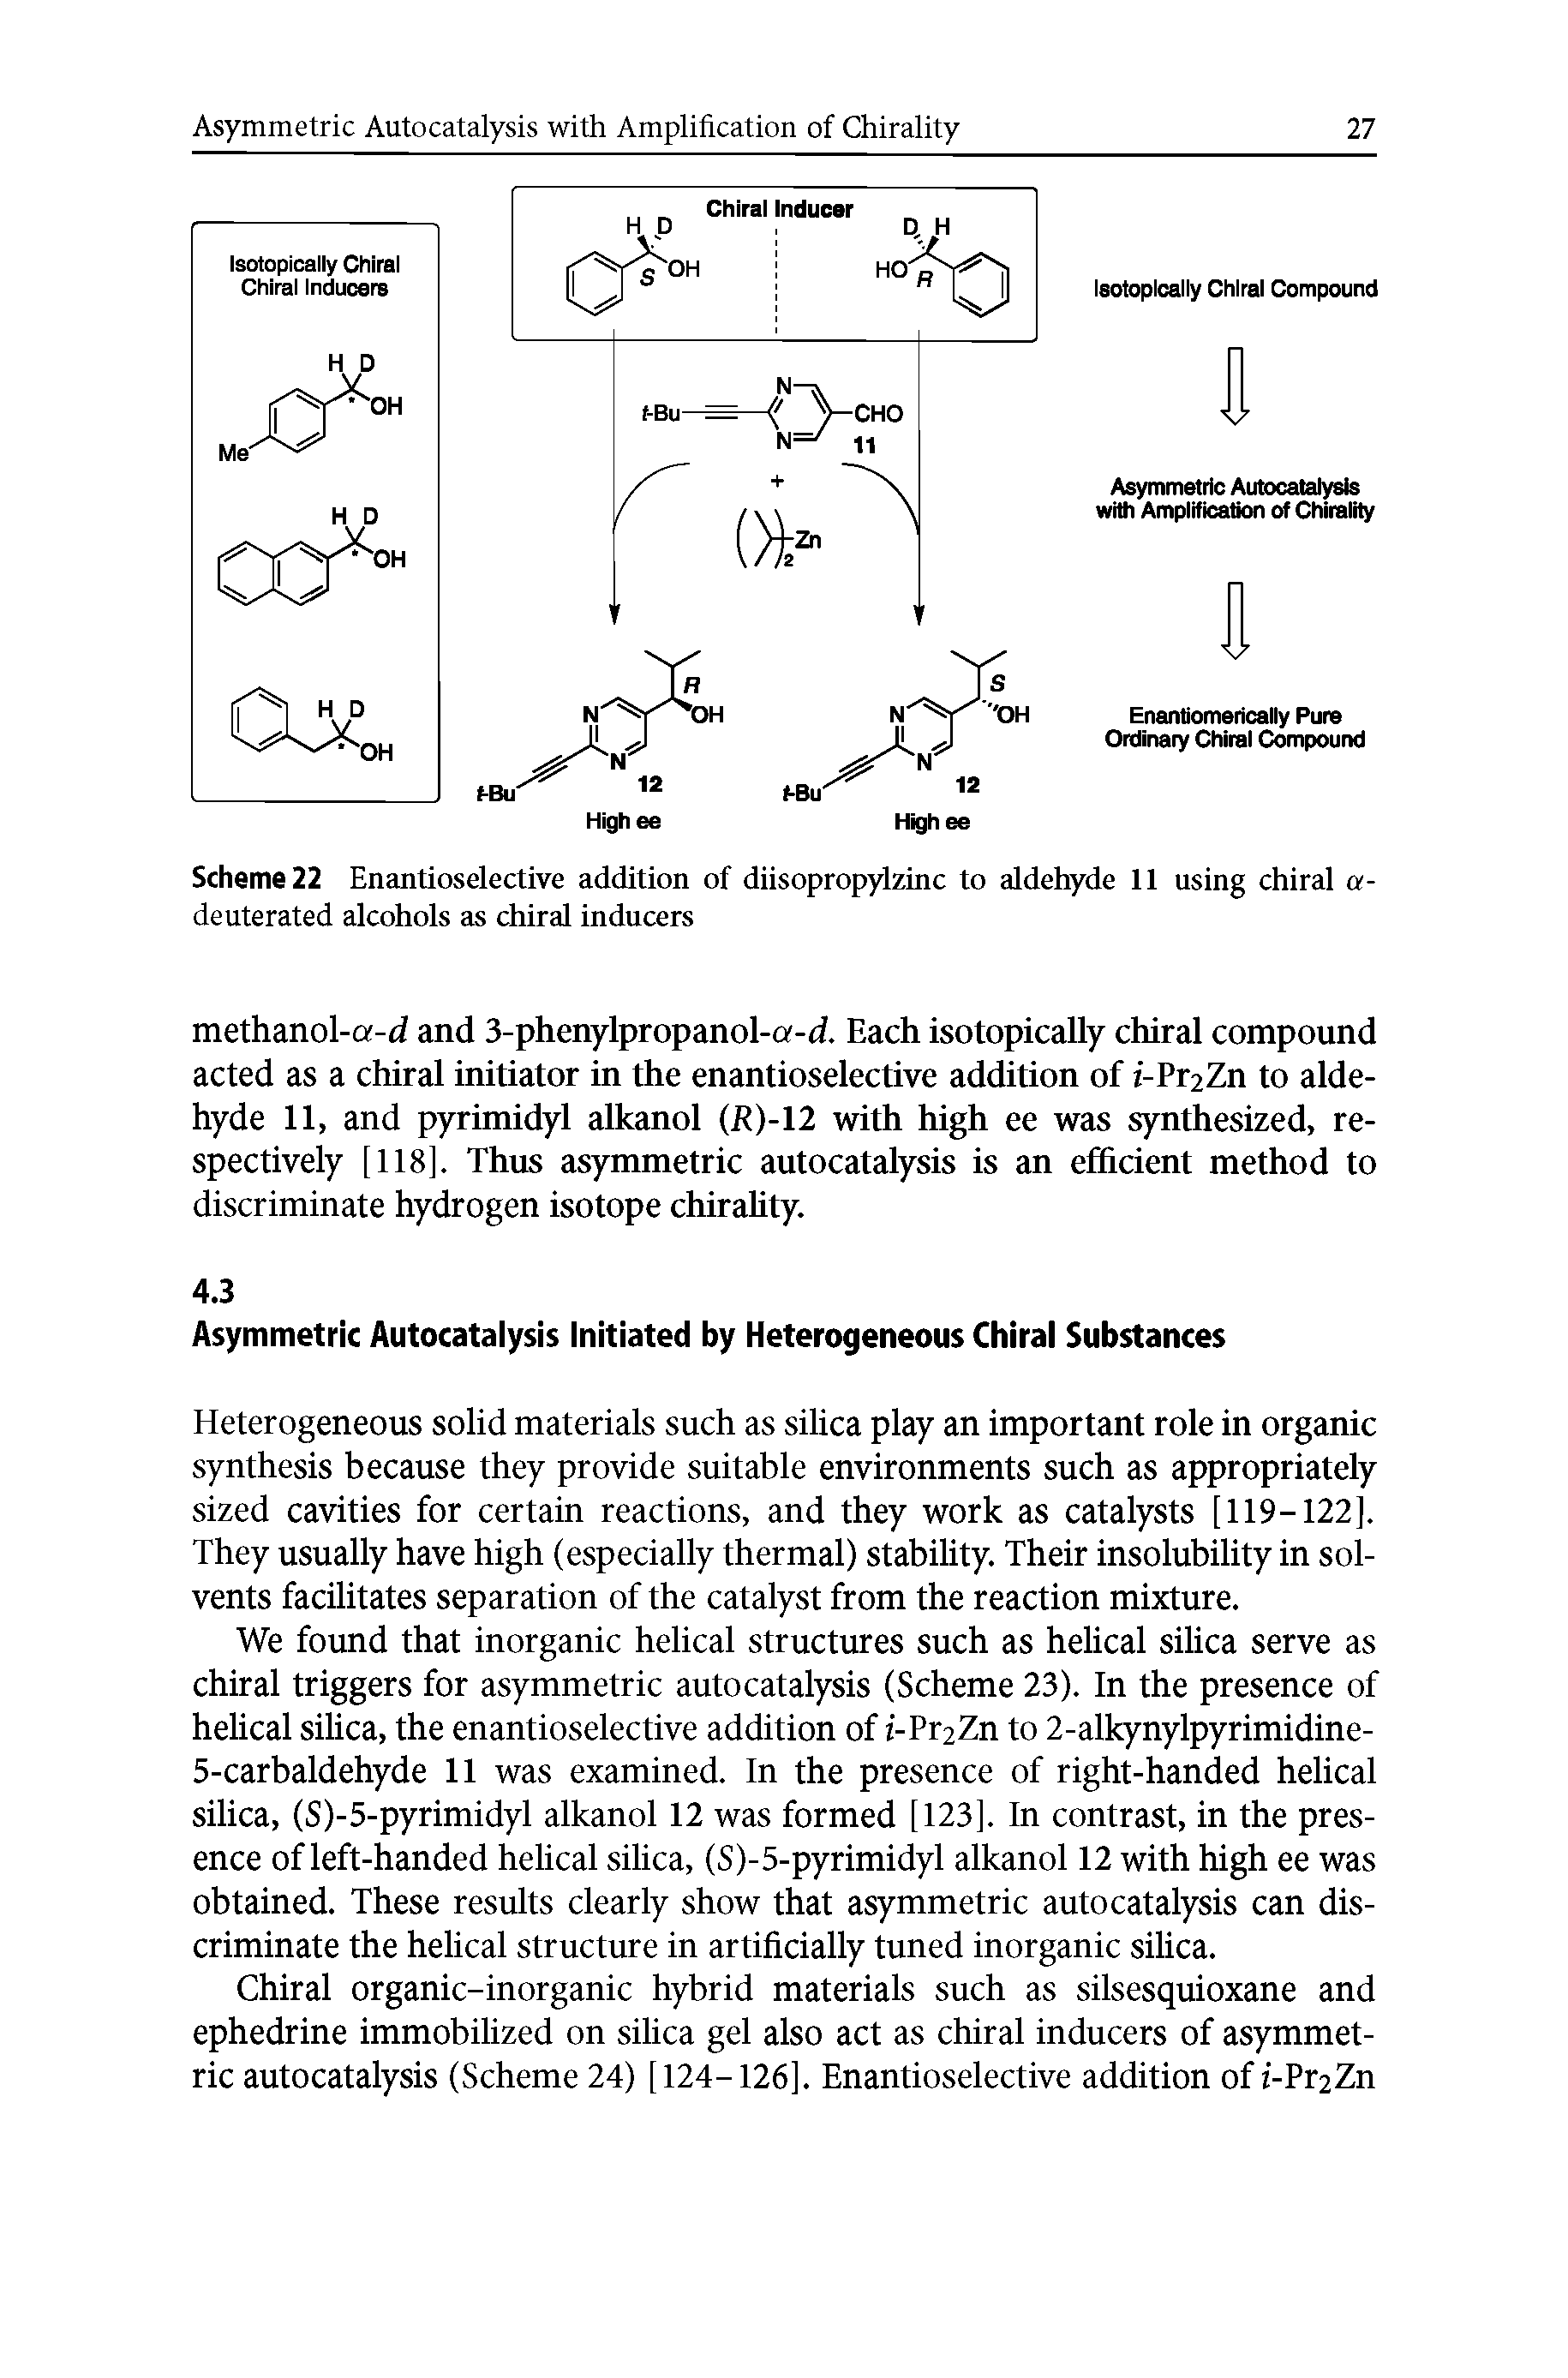 Scheme 22 Enantioselective addition of diisopropylzinc to aldehyde 11 using chiral a-deuterated alcohols as chiral inducers...